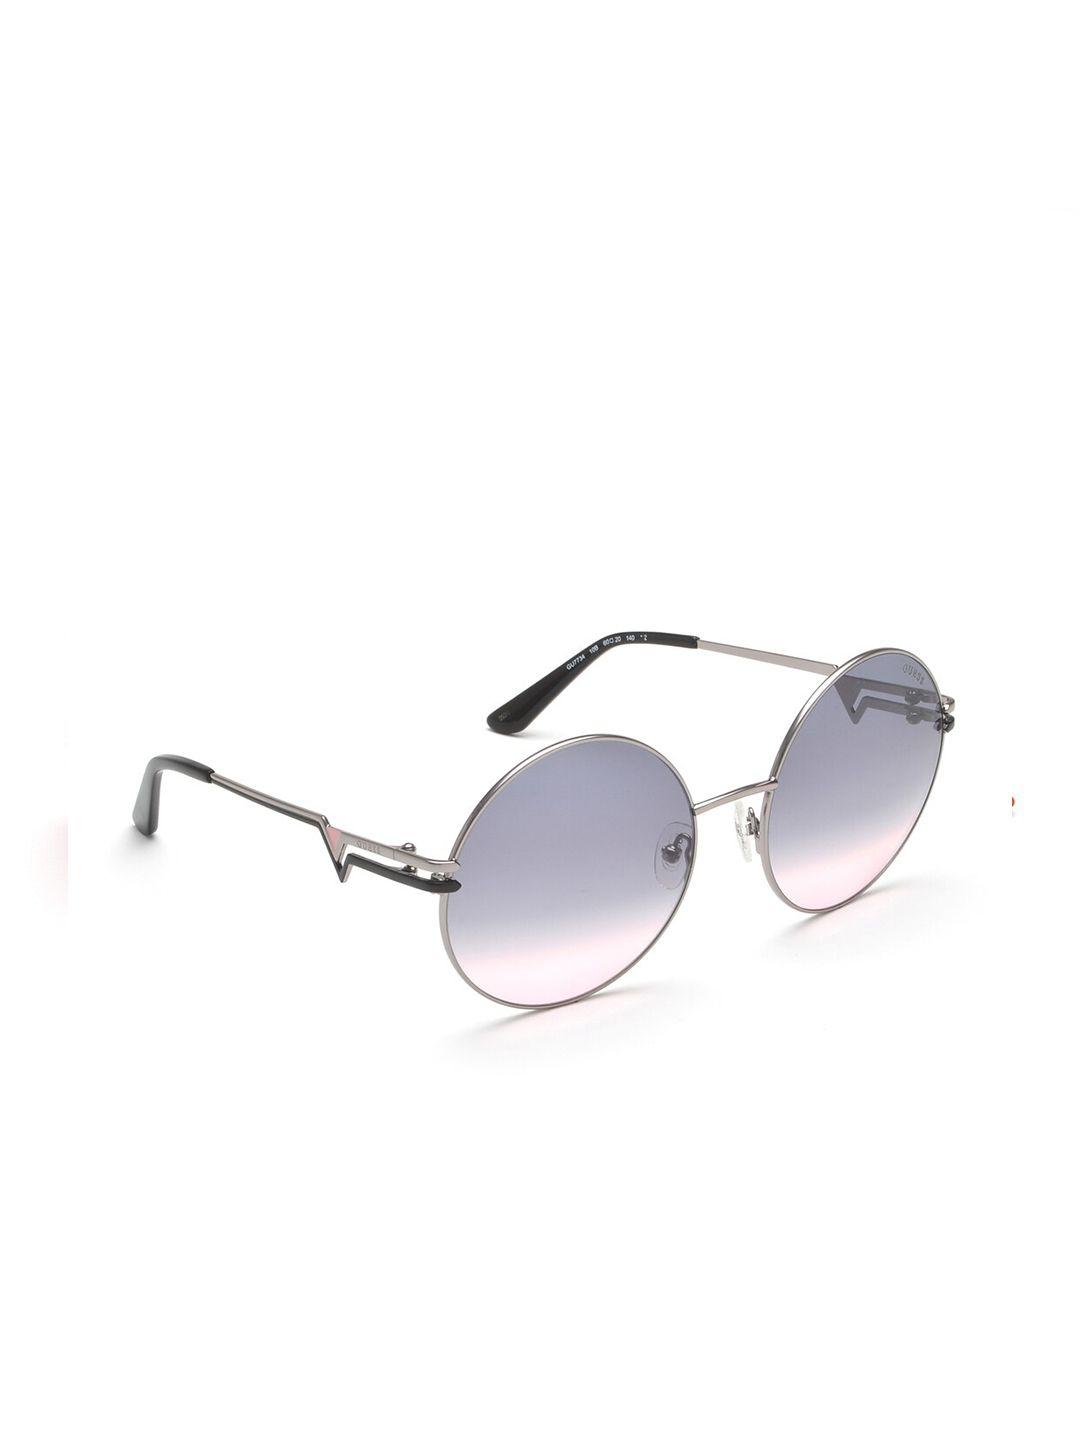 GUESS Women Grey Lens & Silver-Toned Round Sunglasses GUS77346010BSG